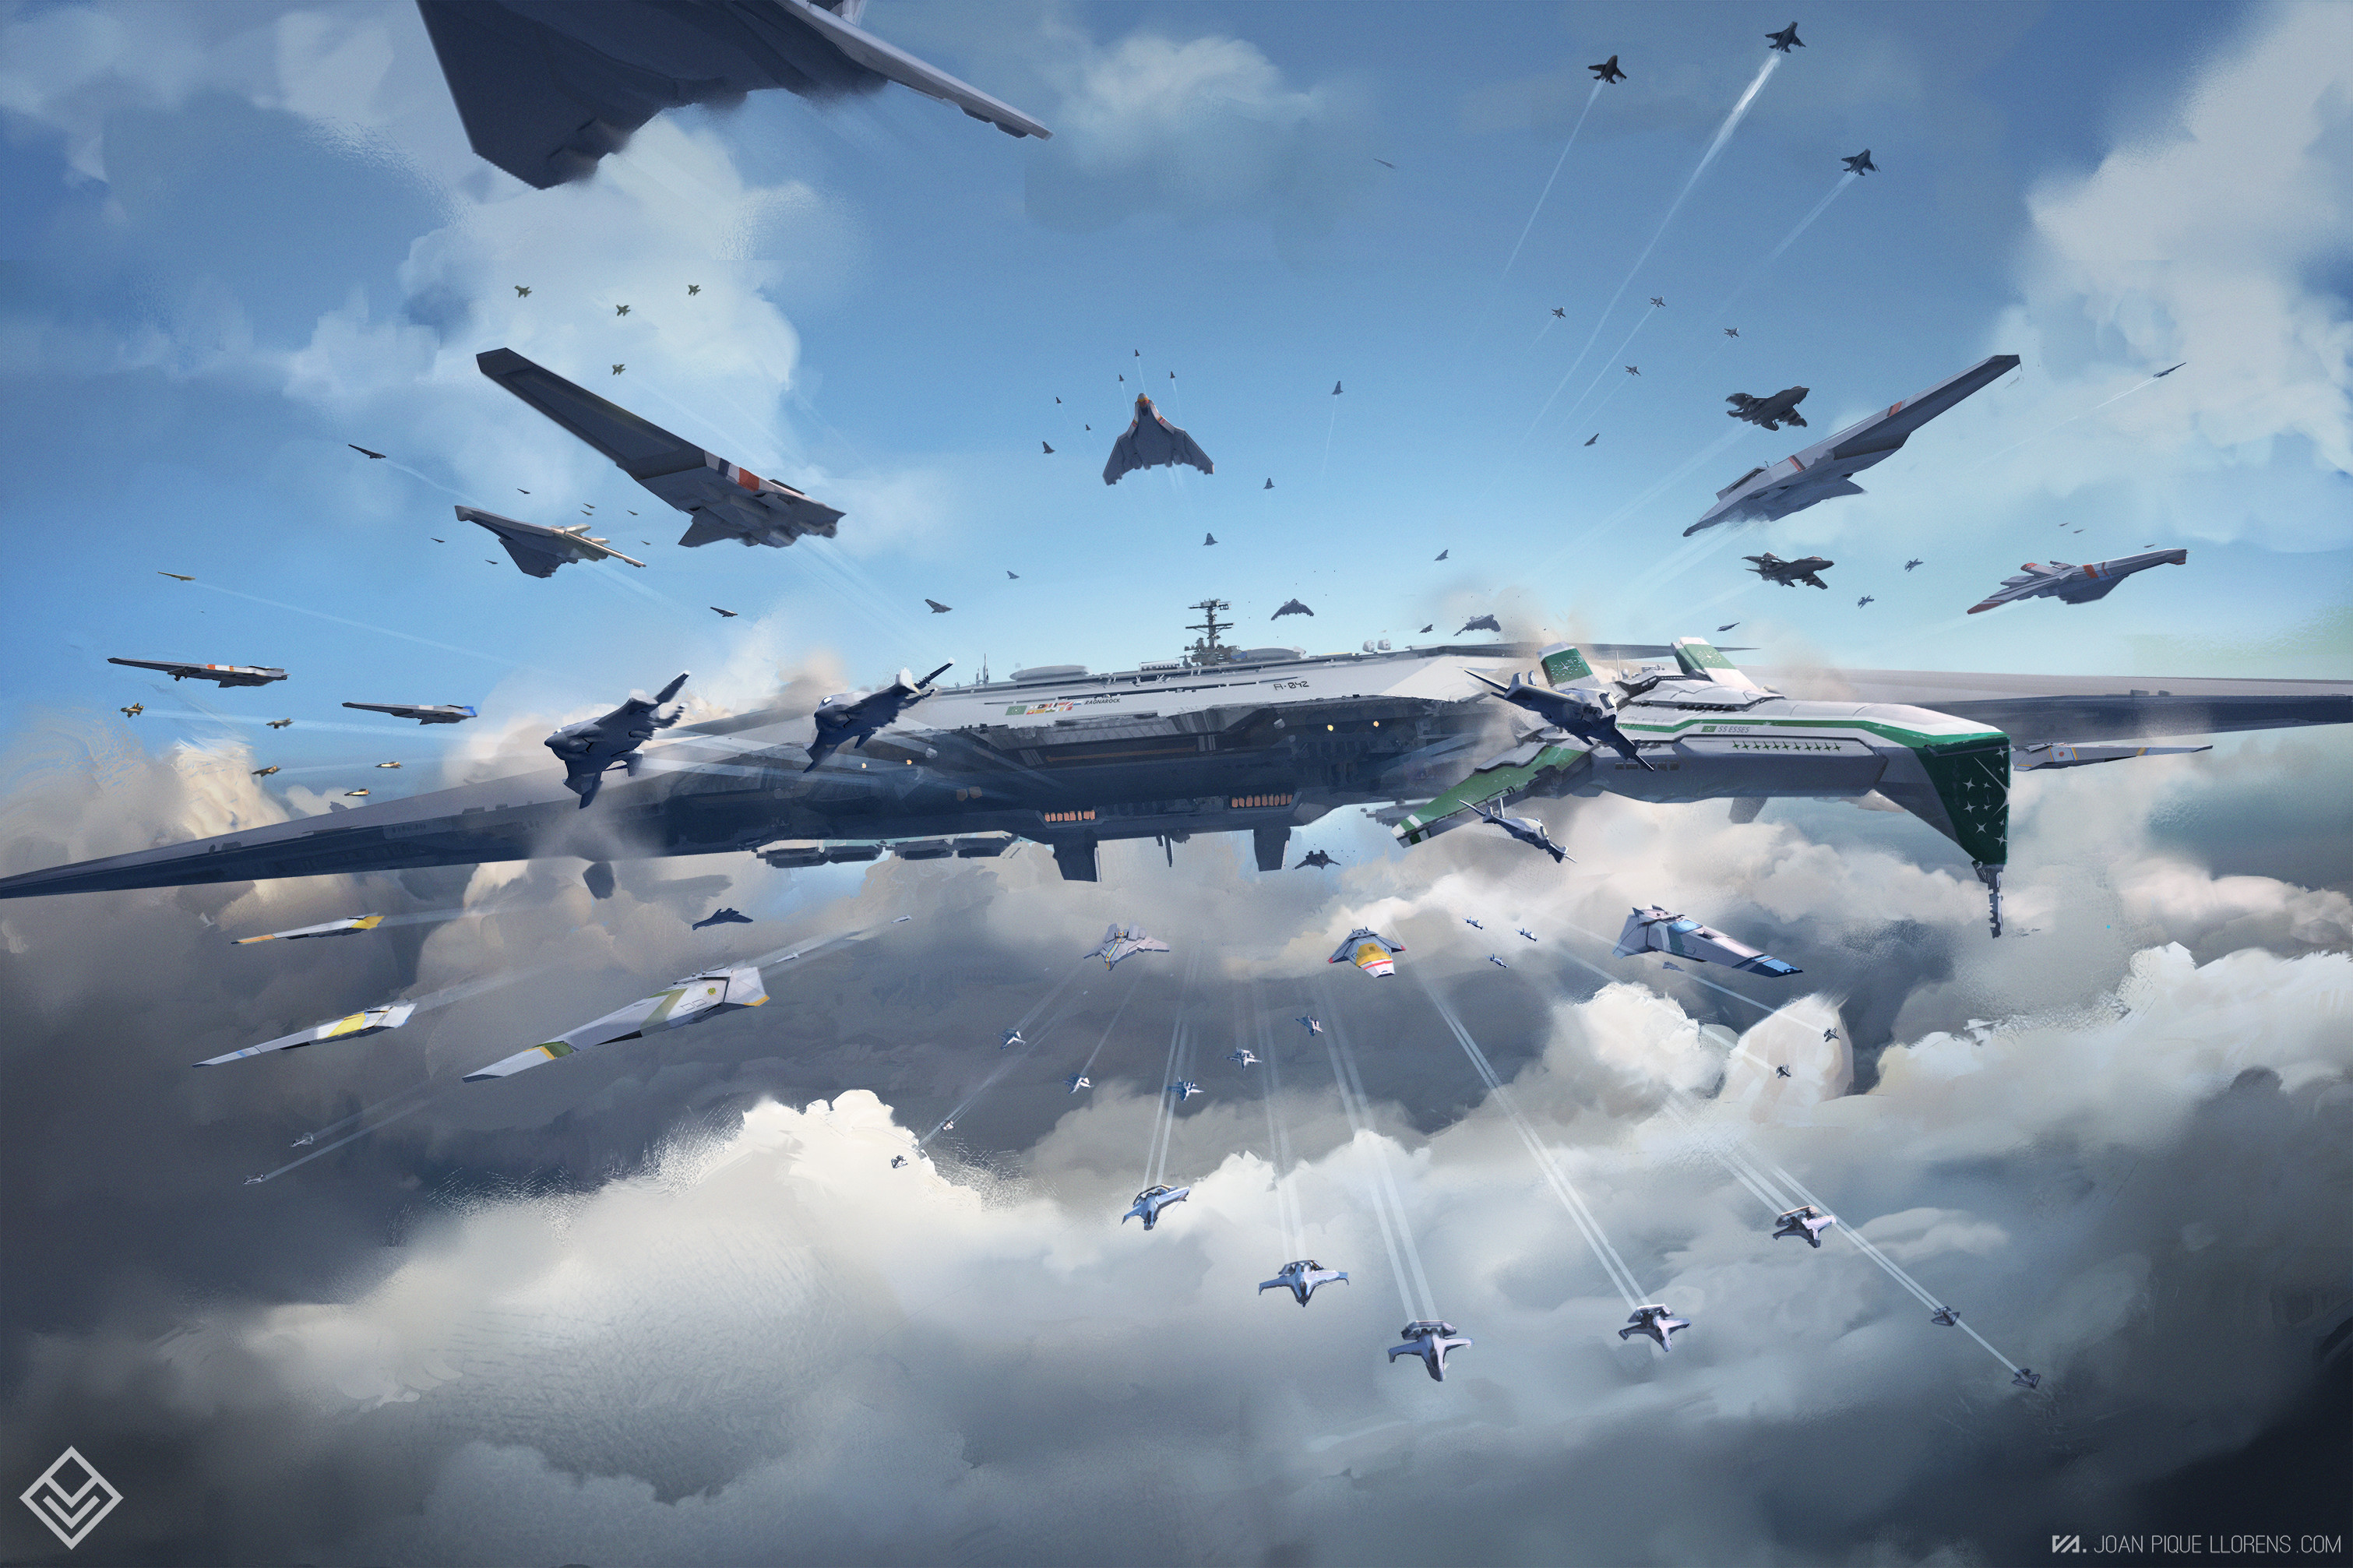 General 3021x2013 science fiction spaceship clouds fantasy art sky aircraft carrier